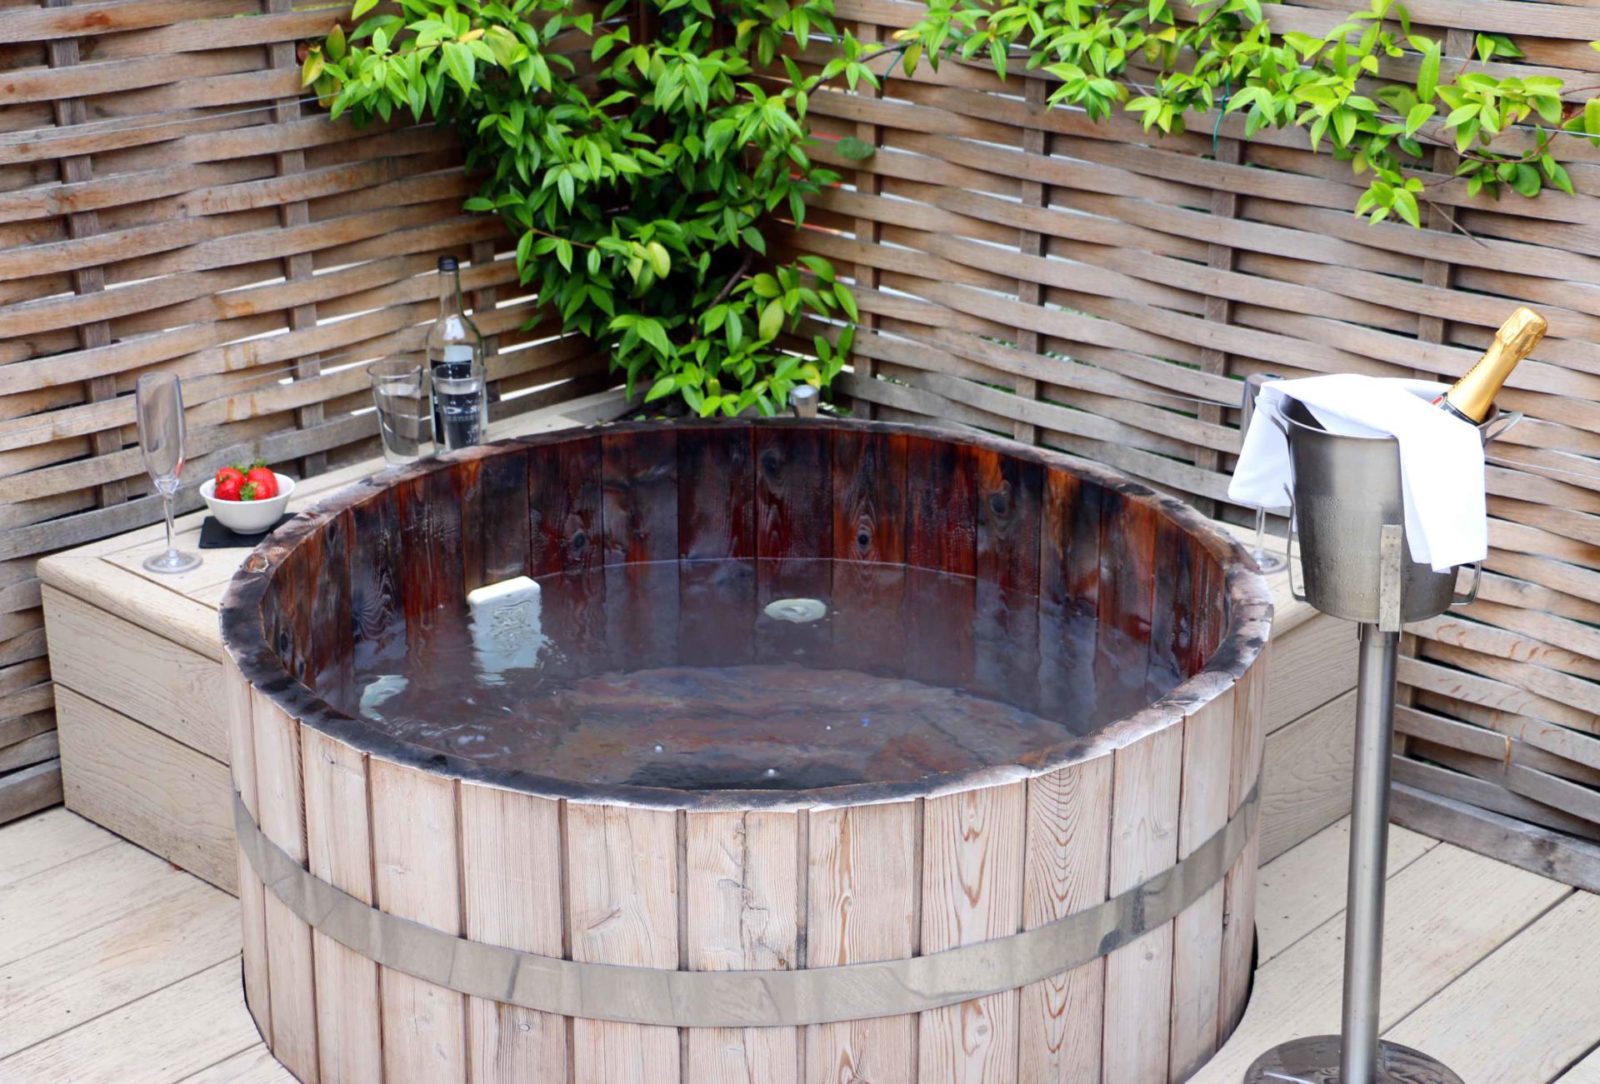 Top 5 UK Luxury Hotels with Outdoor Hot Tubs